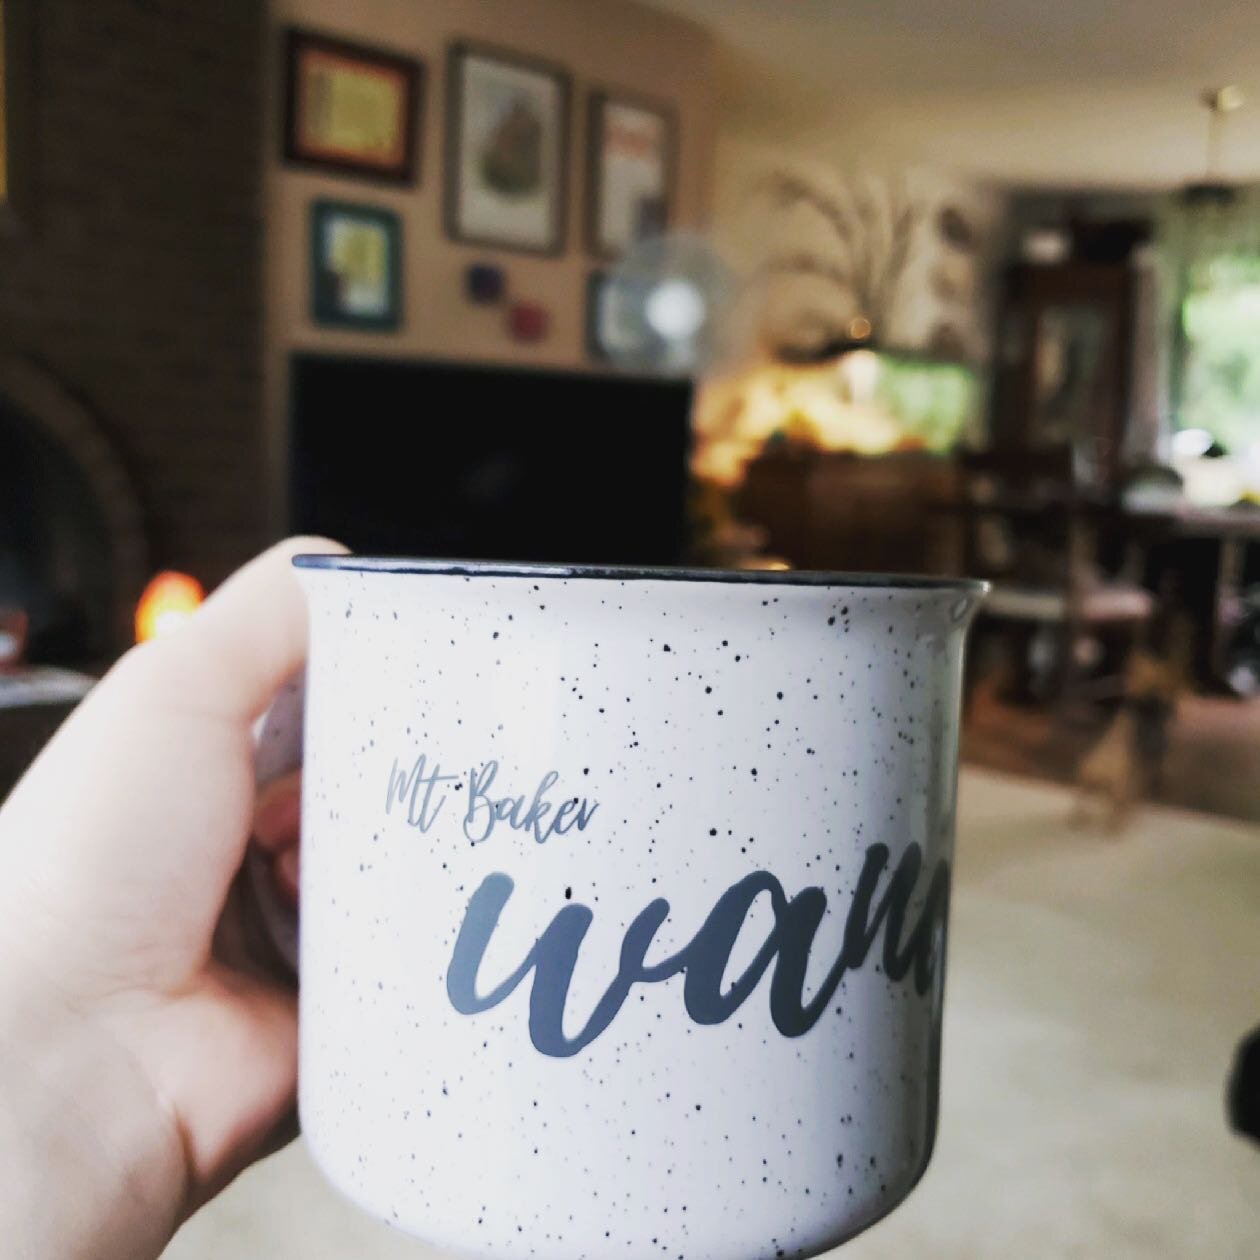 Wander mugs in the wild. Thanks @primrose.everdeen.lioness for the snap of your campy cup at home #wanderaframe